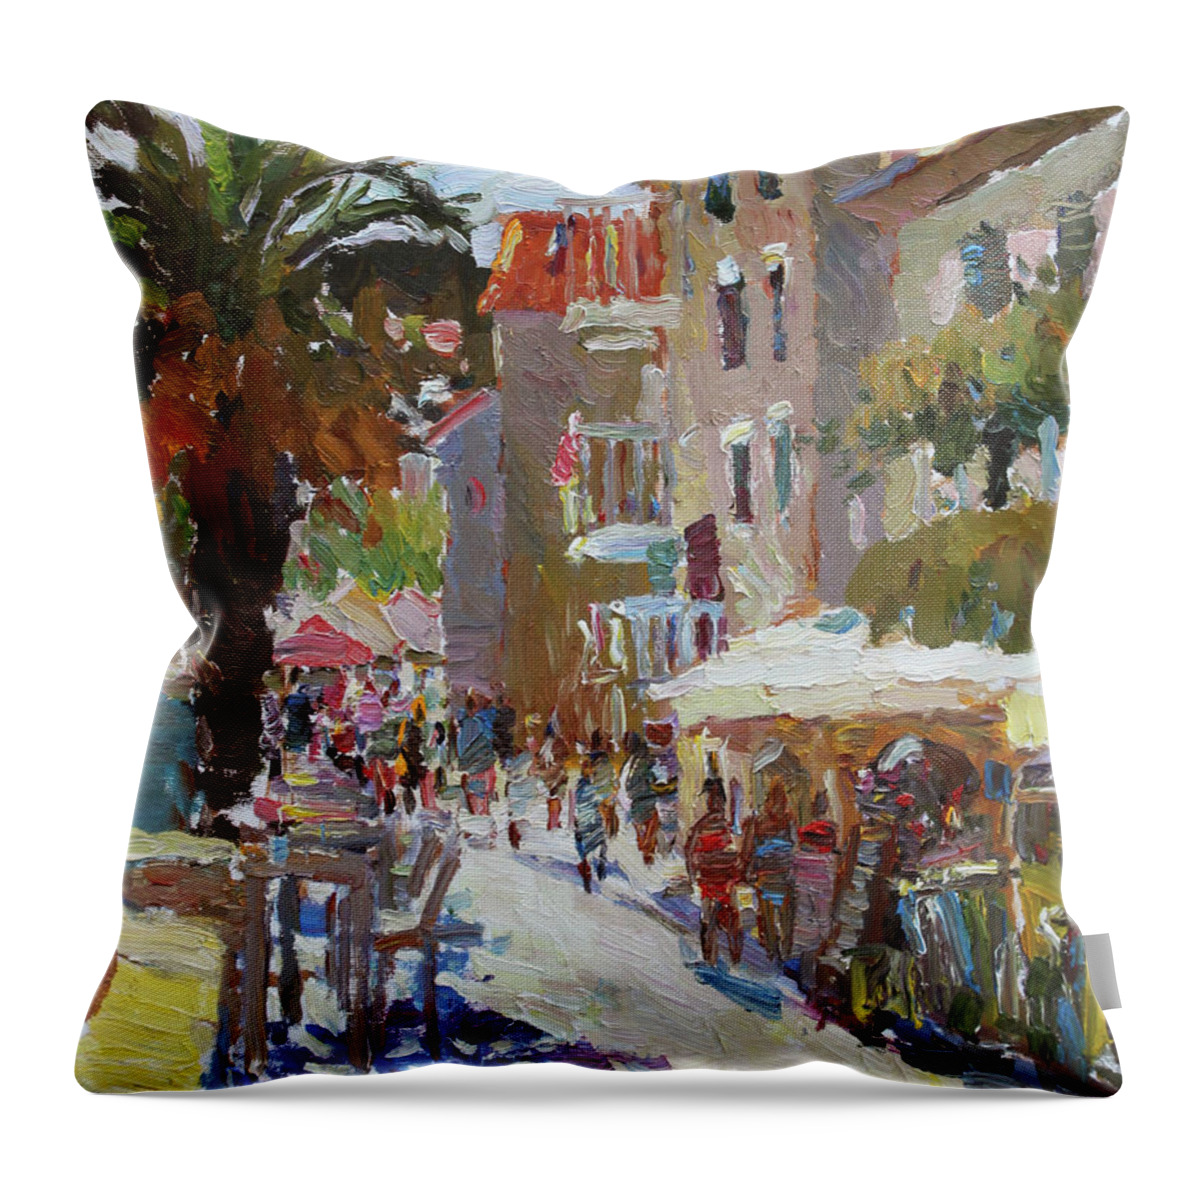 Plein Air Throw Pillow featuring the painting Afternoon by Juliya Zhukova